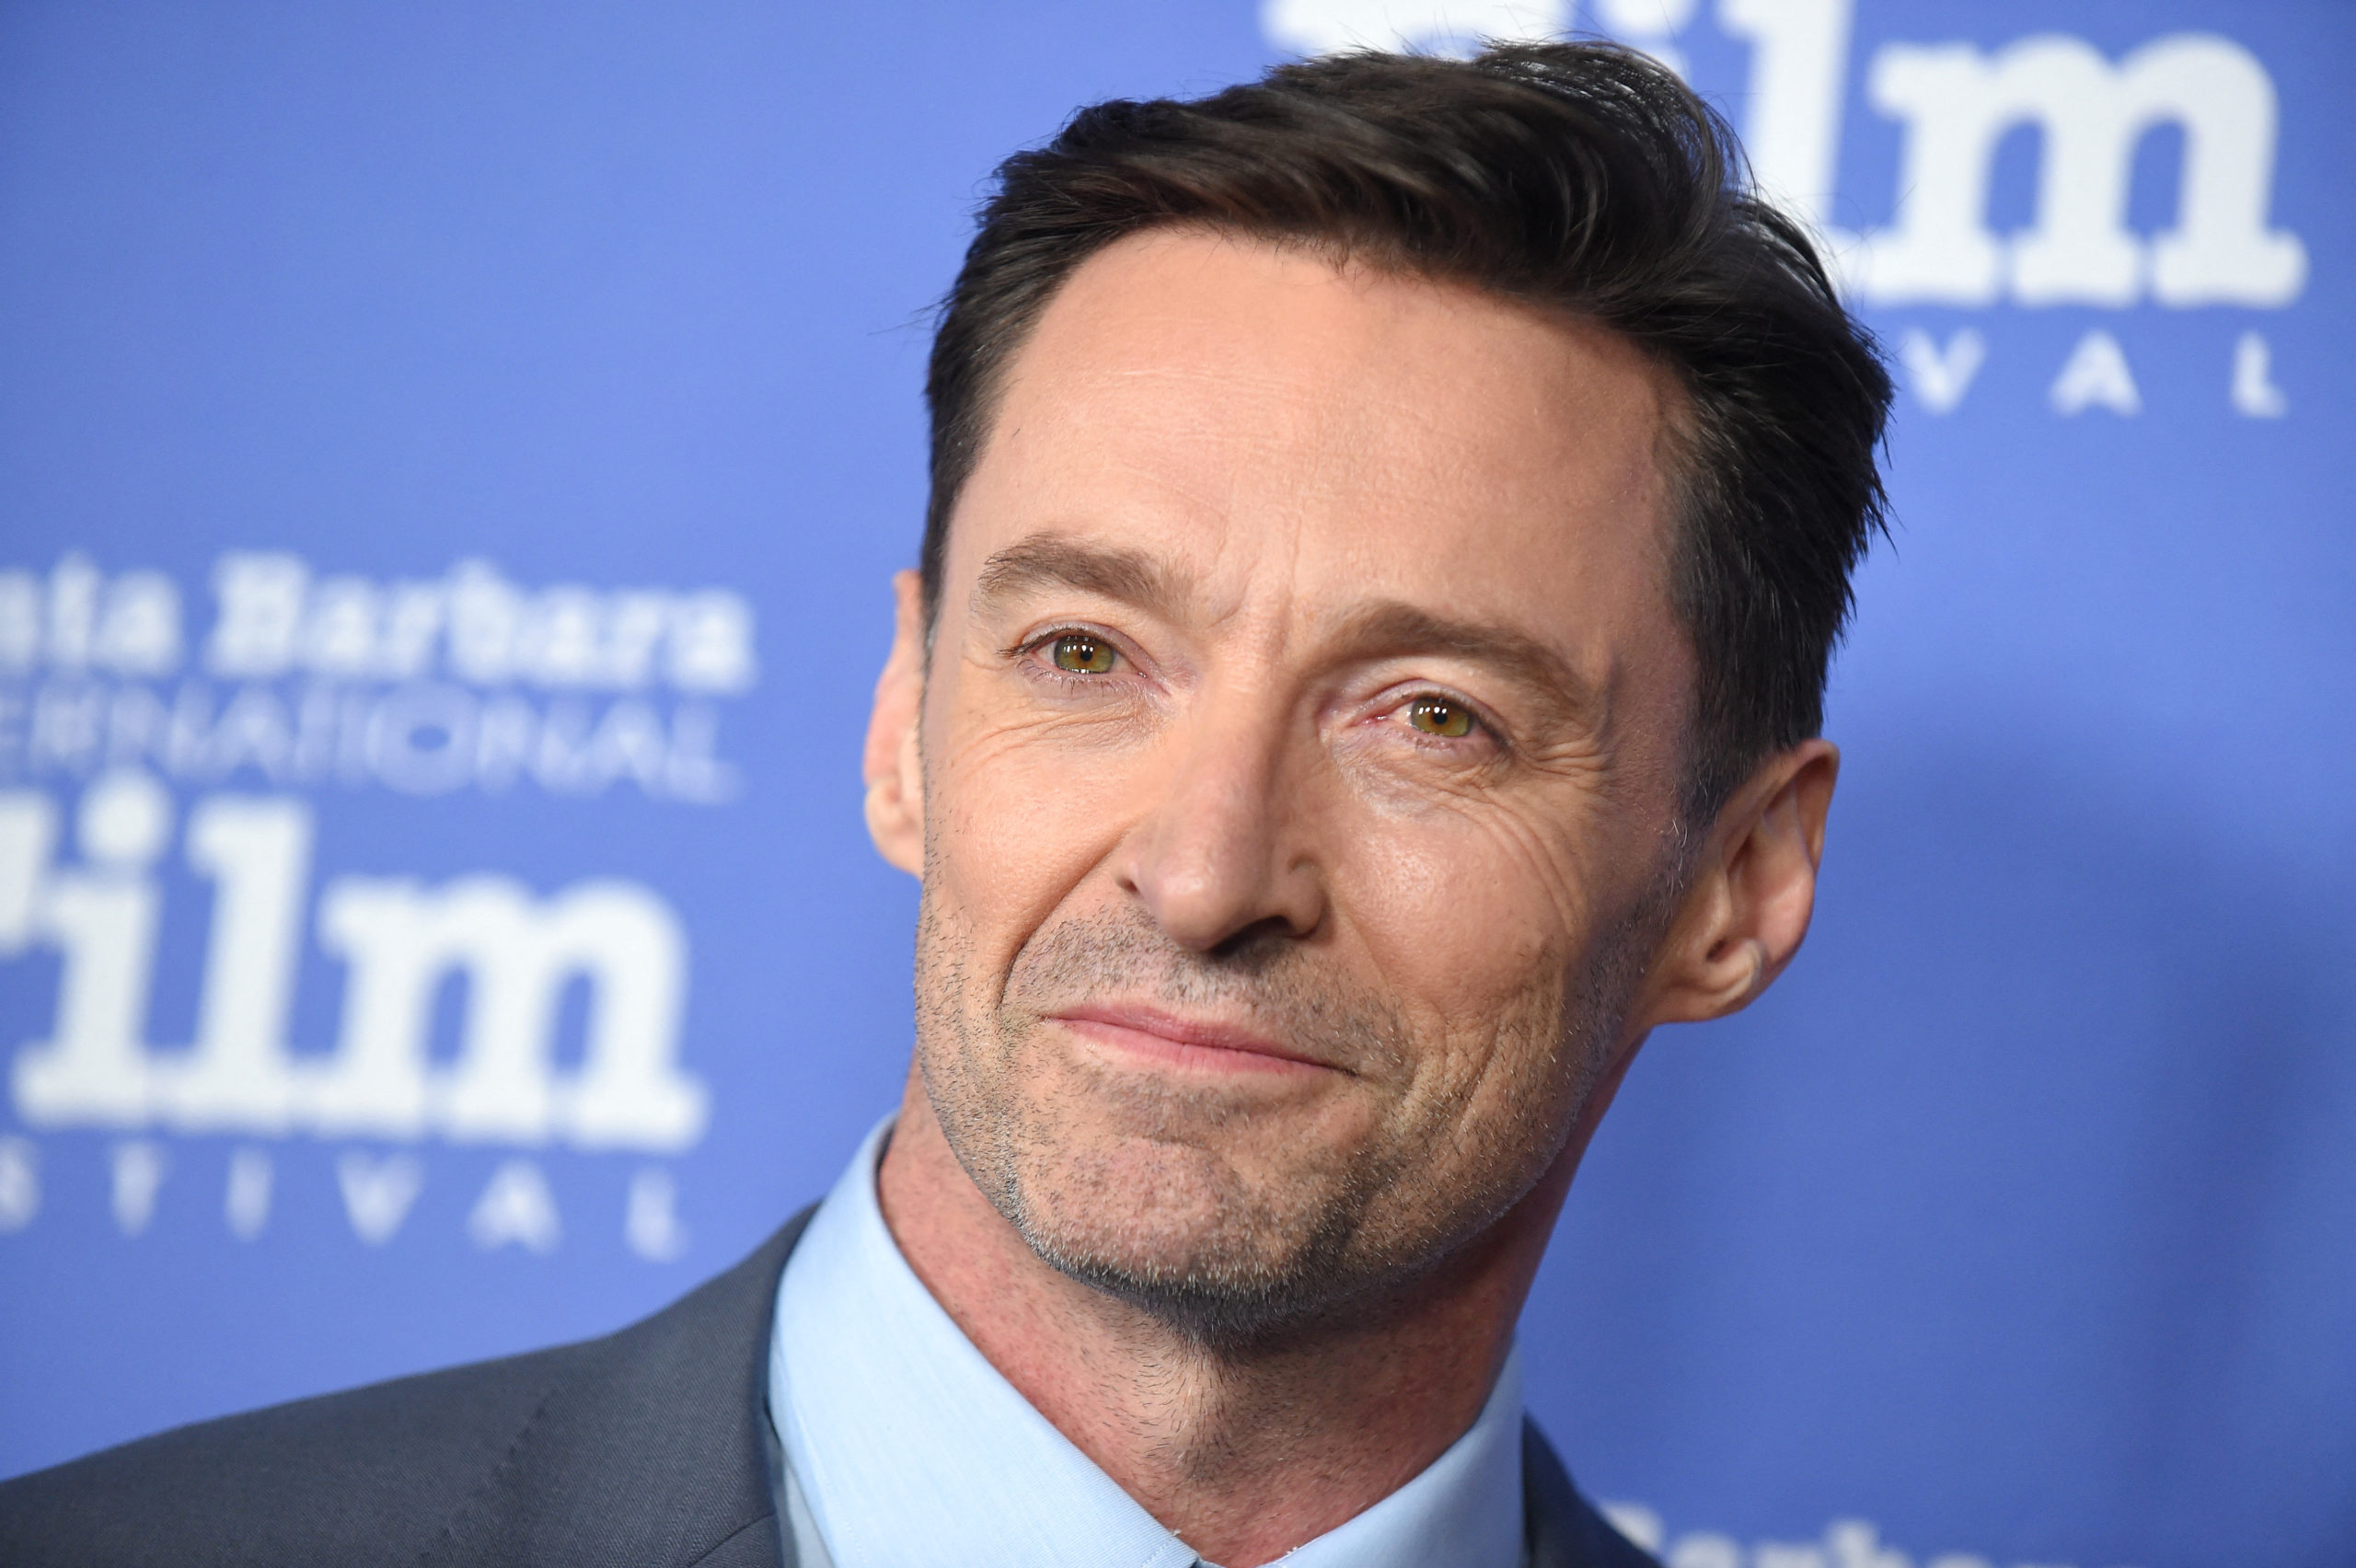 In this file photo taken on November 19, 2018 Australian actor Hugh Jackman attends the 34th annual Santa Barbara International Film Festival in Santa Barbara, California. - Hugh Jackman helped pioneer the superhero sequels that dominate modern megaplexes, but the former "X-Men" actor leapt at the chance to star in something more rare these days -- a totally original sci-fi from a major studio, in "Reminiscence." The Warner Bros film, out on Friday, comes from the creators of TV smash hit "Westworld," and imagines a dystopian near-future Miami in which a rising ocean has flooded the streets. (P